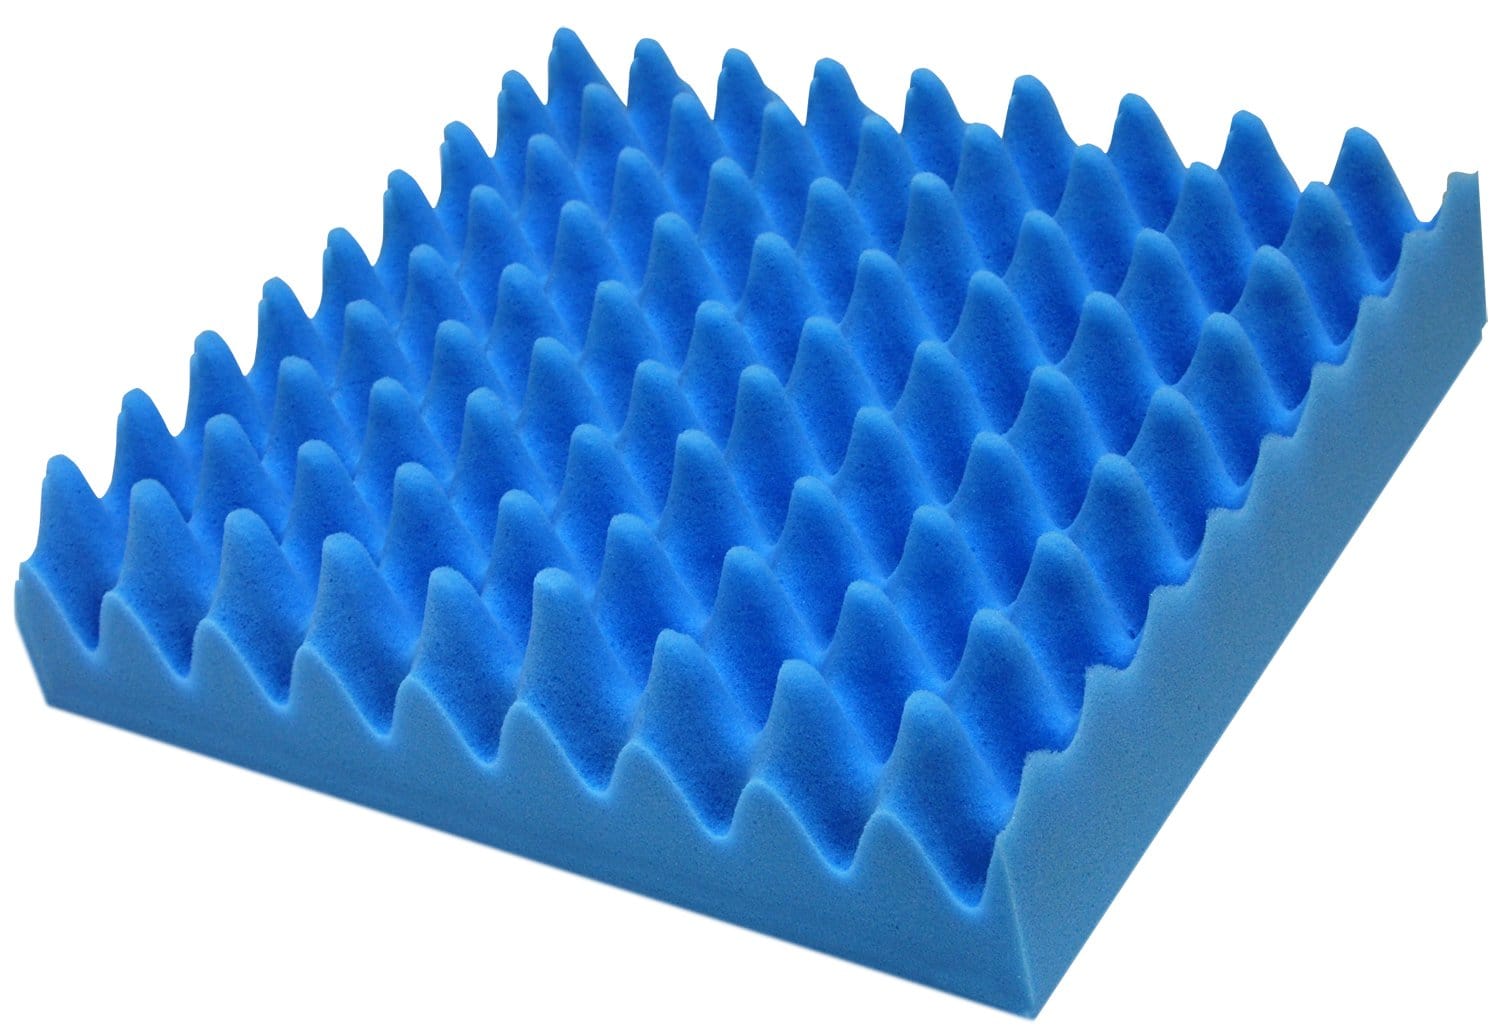 SkilCare Cushions No / 4" SkilCare Convoluted 18" Foam Only Cushion, 4"H